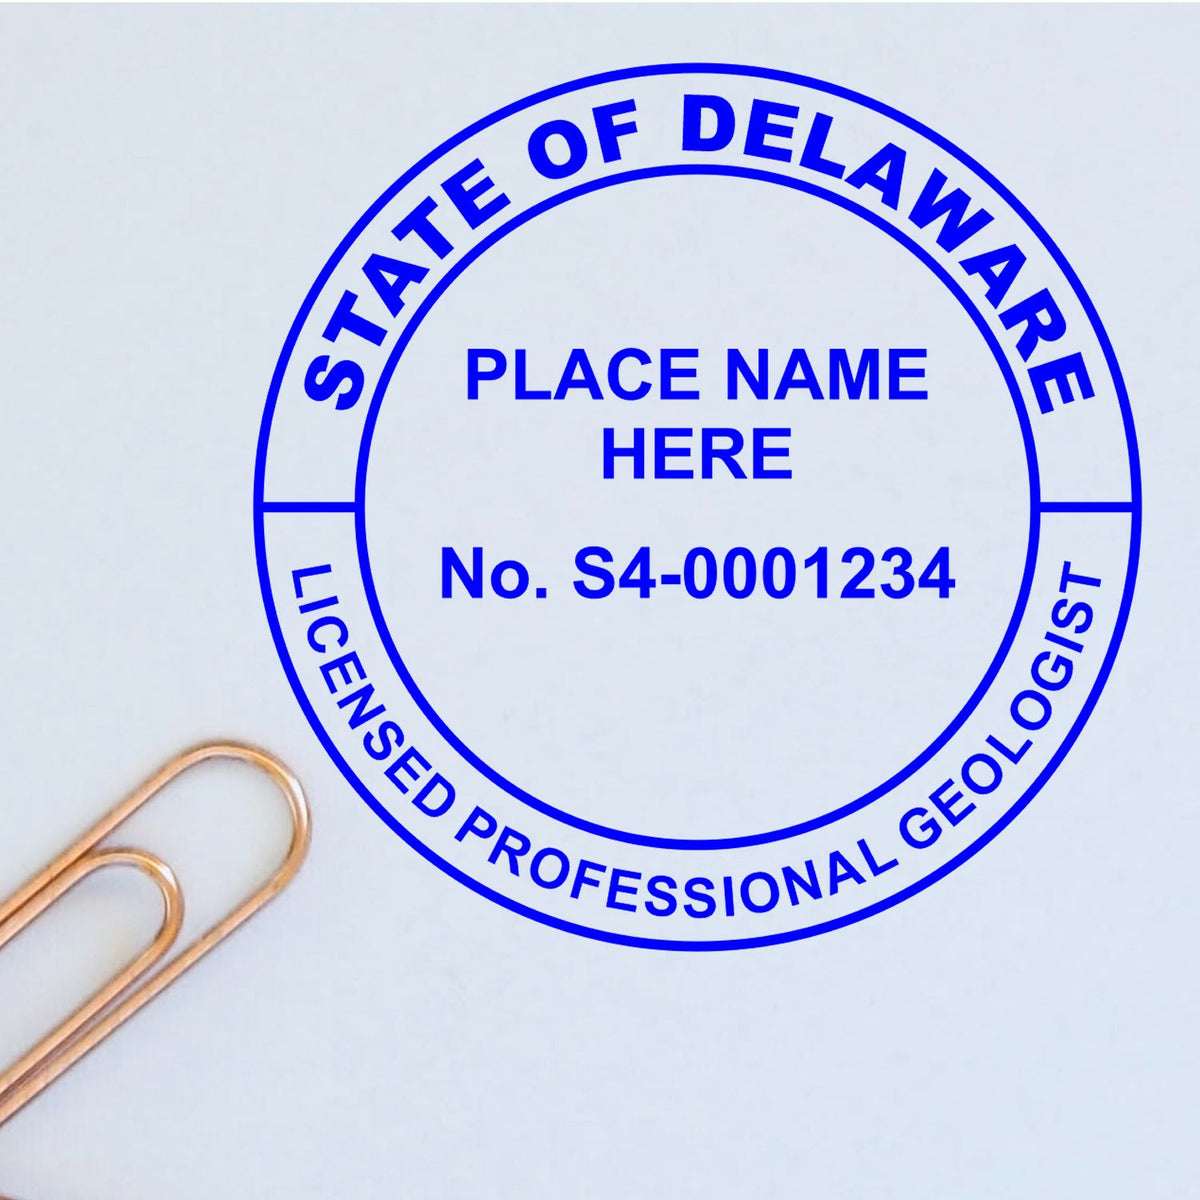 This paper is stamped with a sample imprint of the Self-Inking Delaware Geologist Stamp, signifying its quality and reliability.